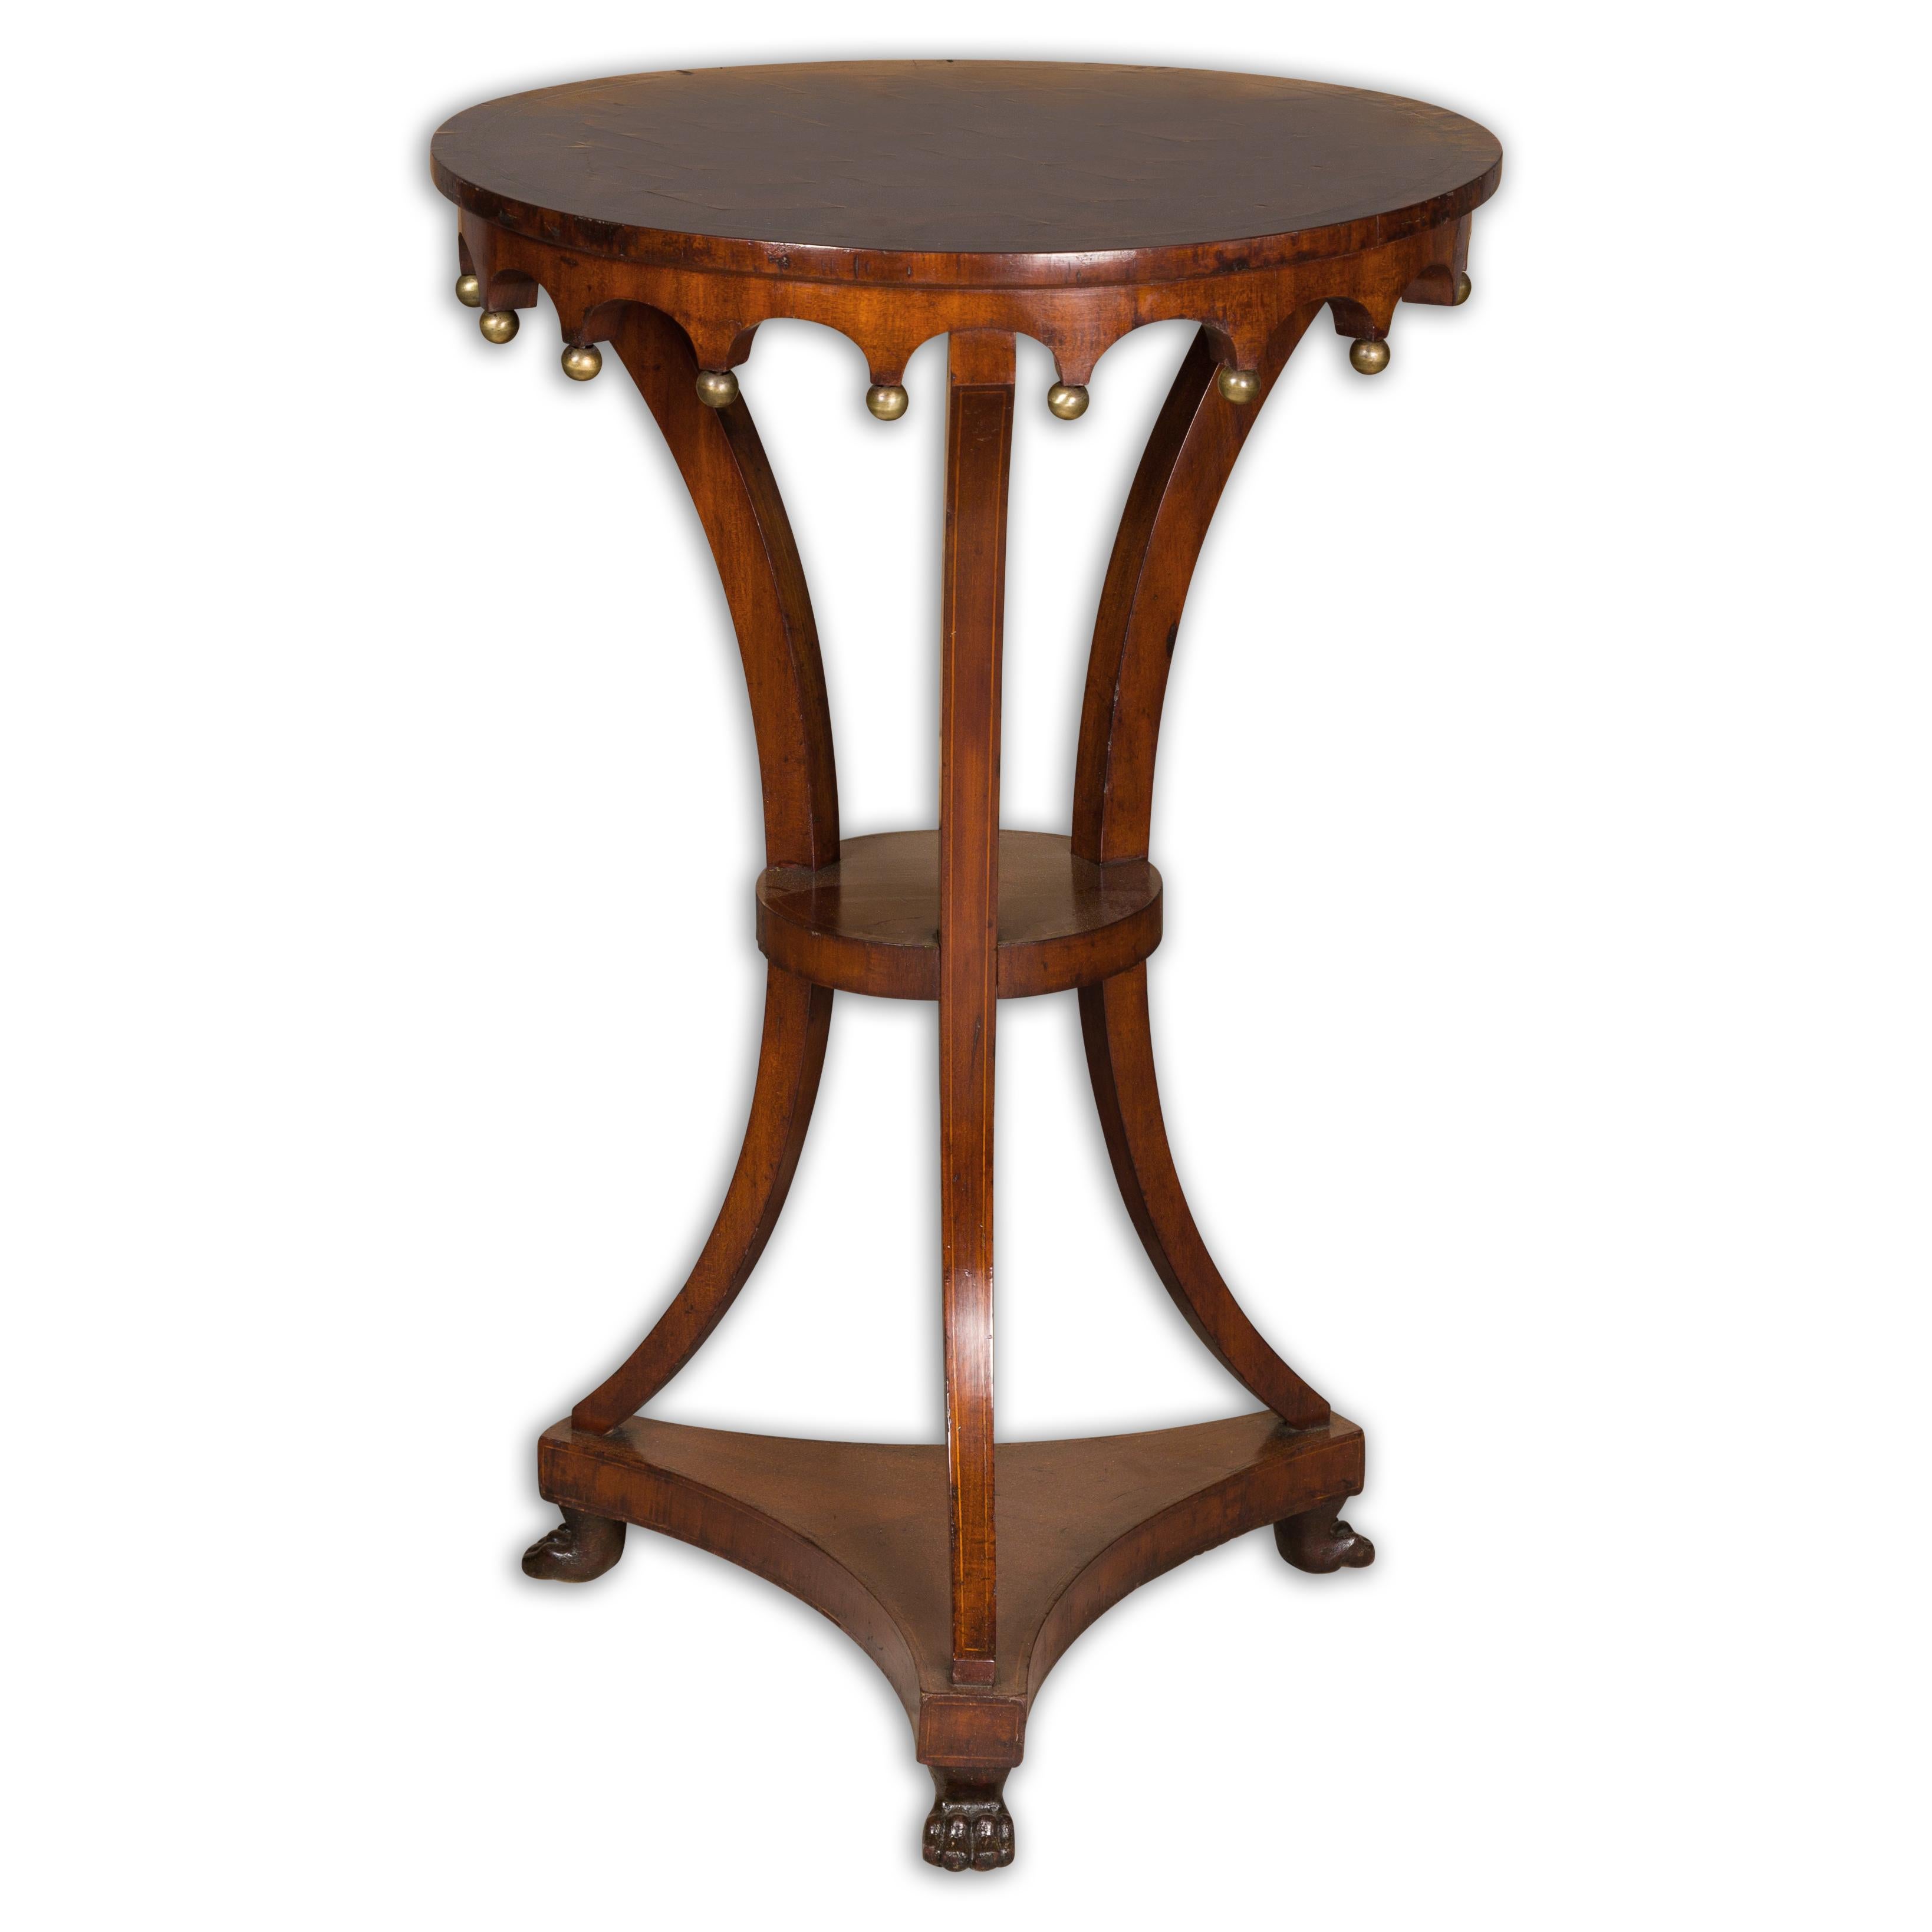 An Italian walnut guéridon side table from the early 19th century with parquetry top, carved apron, petite gilt spheres and lion paw feet. Presenting a piece of Italian design, this early 19th-century walnut guéridon side table is a lovely